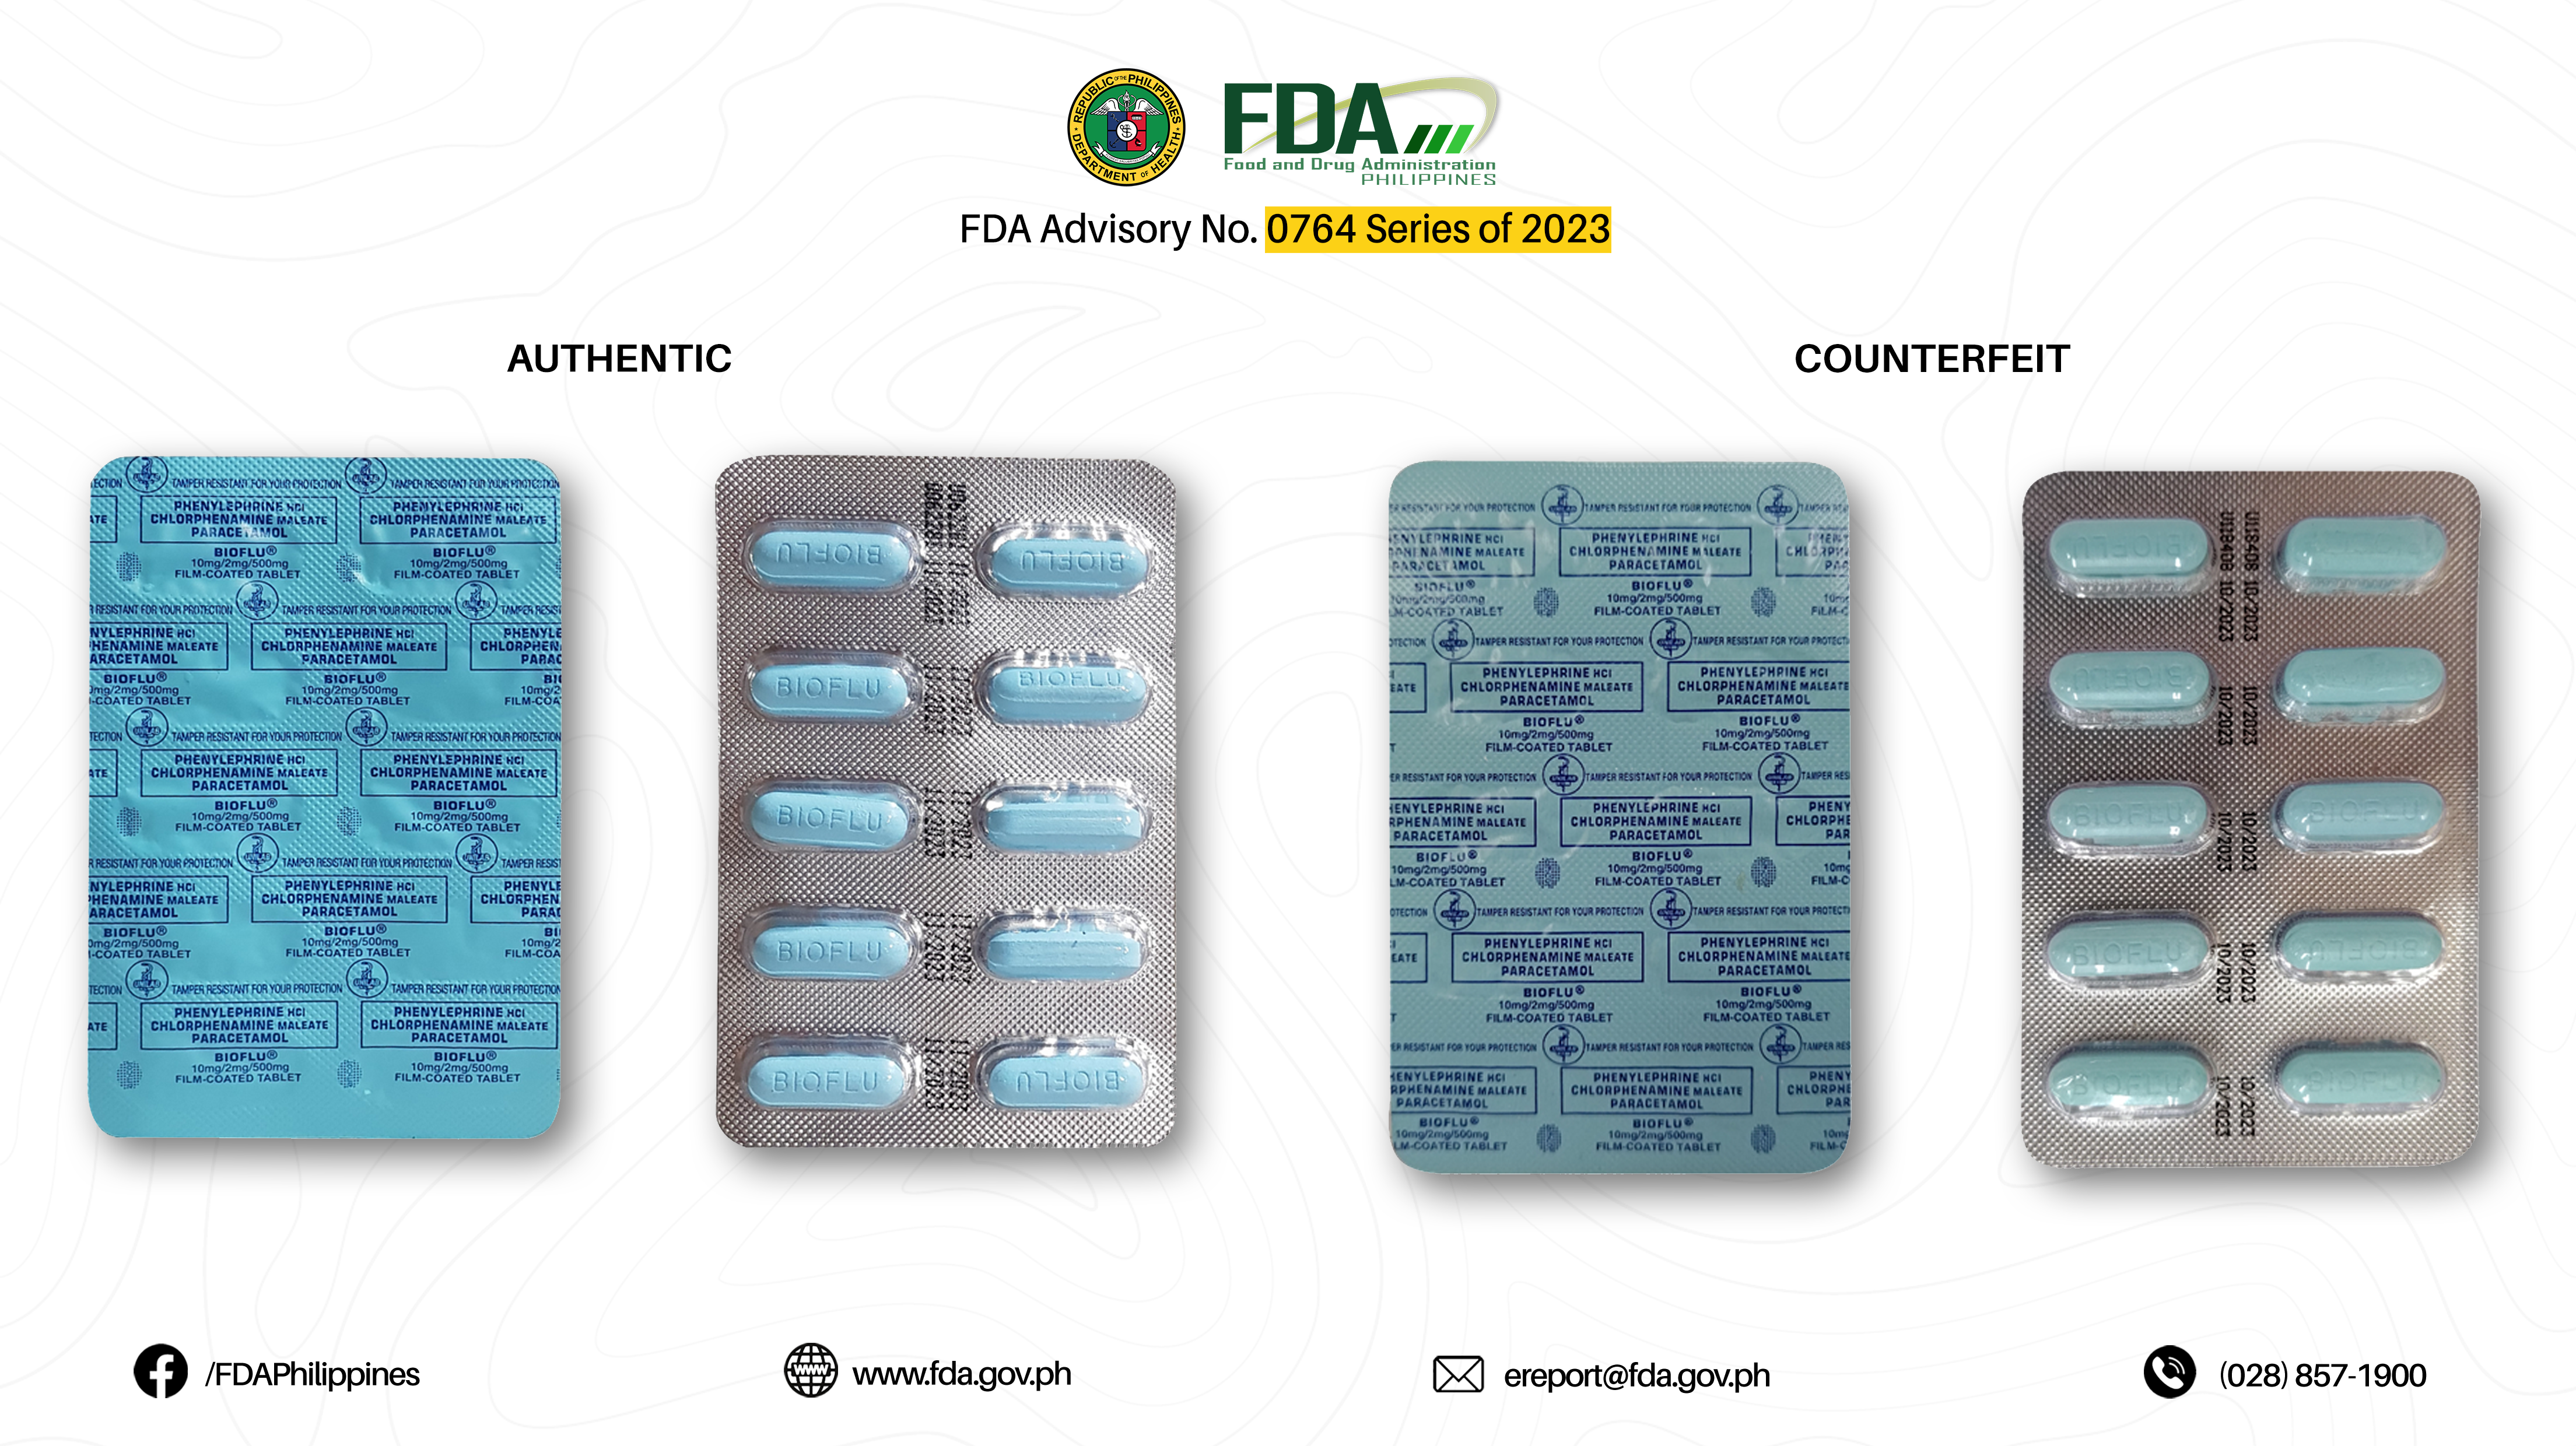 Images of fake and real medicines in blister packs.